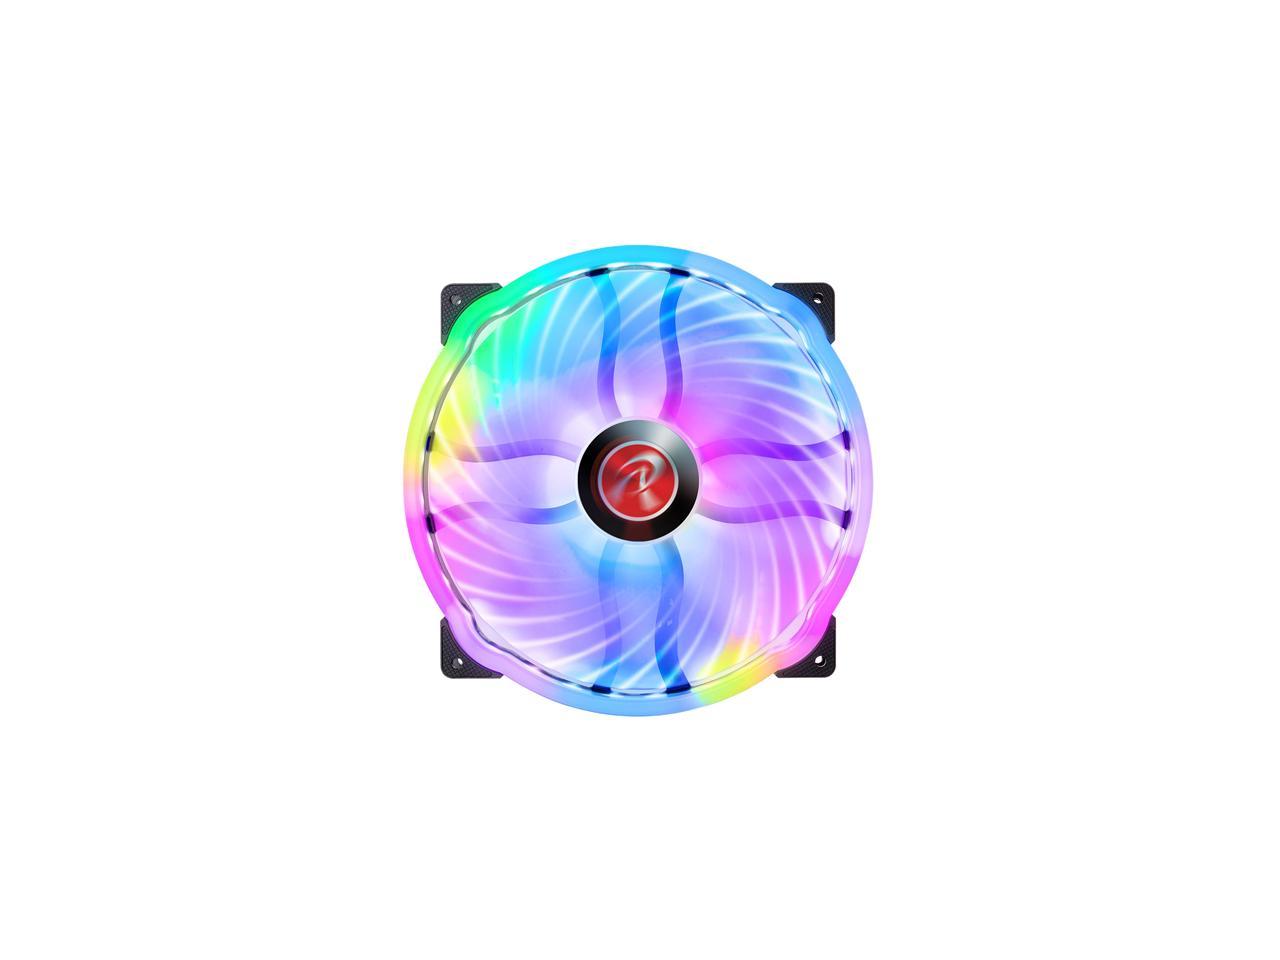 RAIJINTEK ANEMI 20 RBW, 200mm Addressable RGB Fan, The First 20030 Fan with Outer Ring LED + Inner Ring LED, with Full O-type LED Ring 42pcs LEDs in Total, 32pcs LEDs (outer) + 10pcs LEDs (inner)